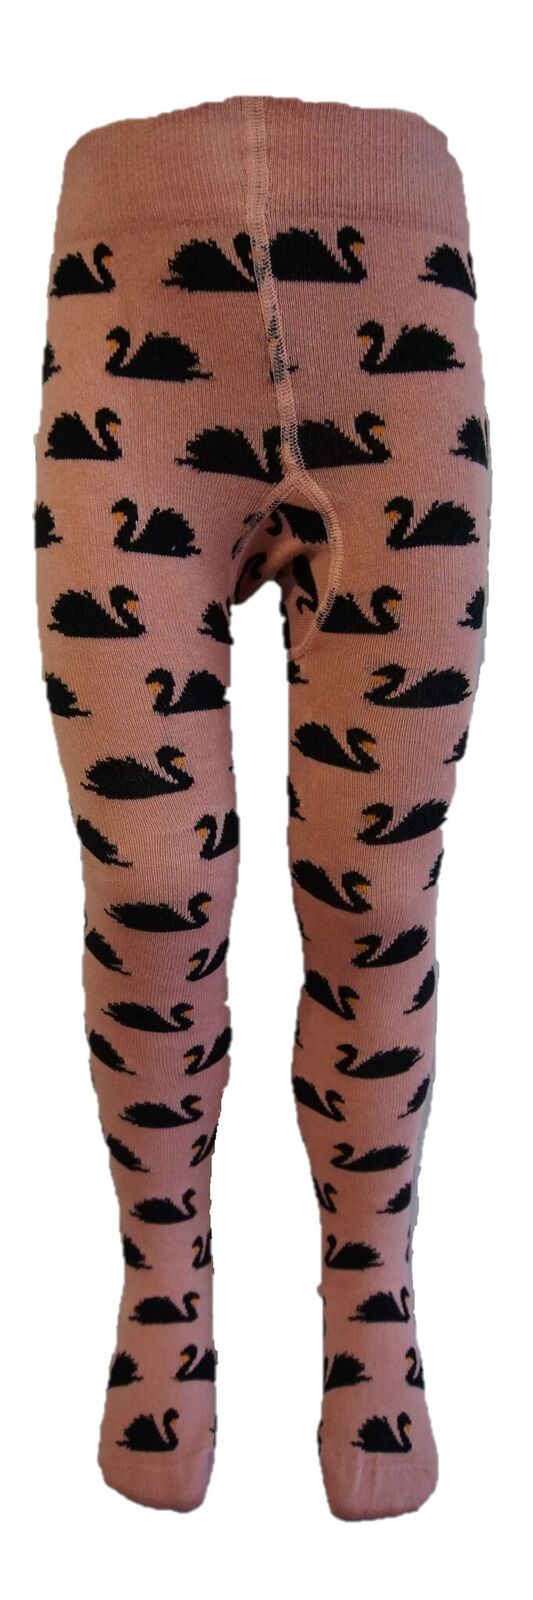 S & S Tights - Swans